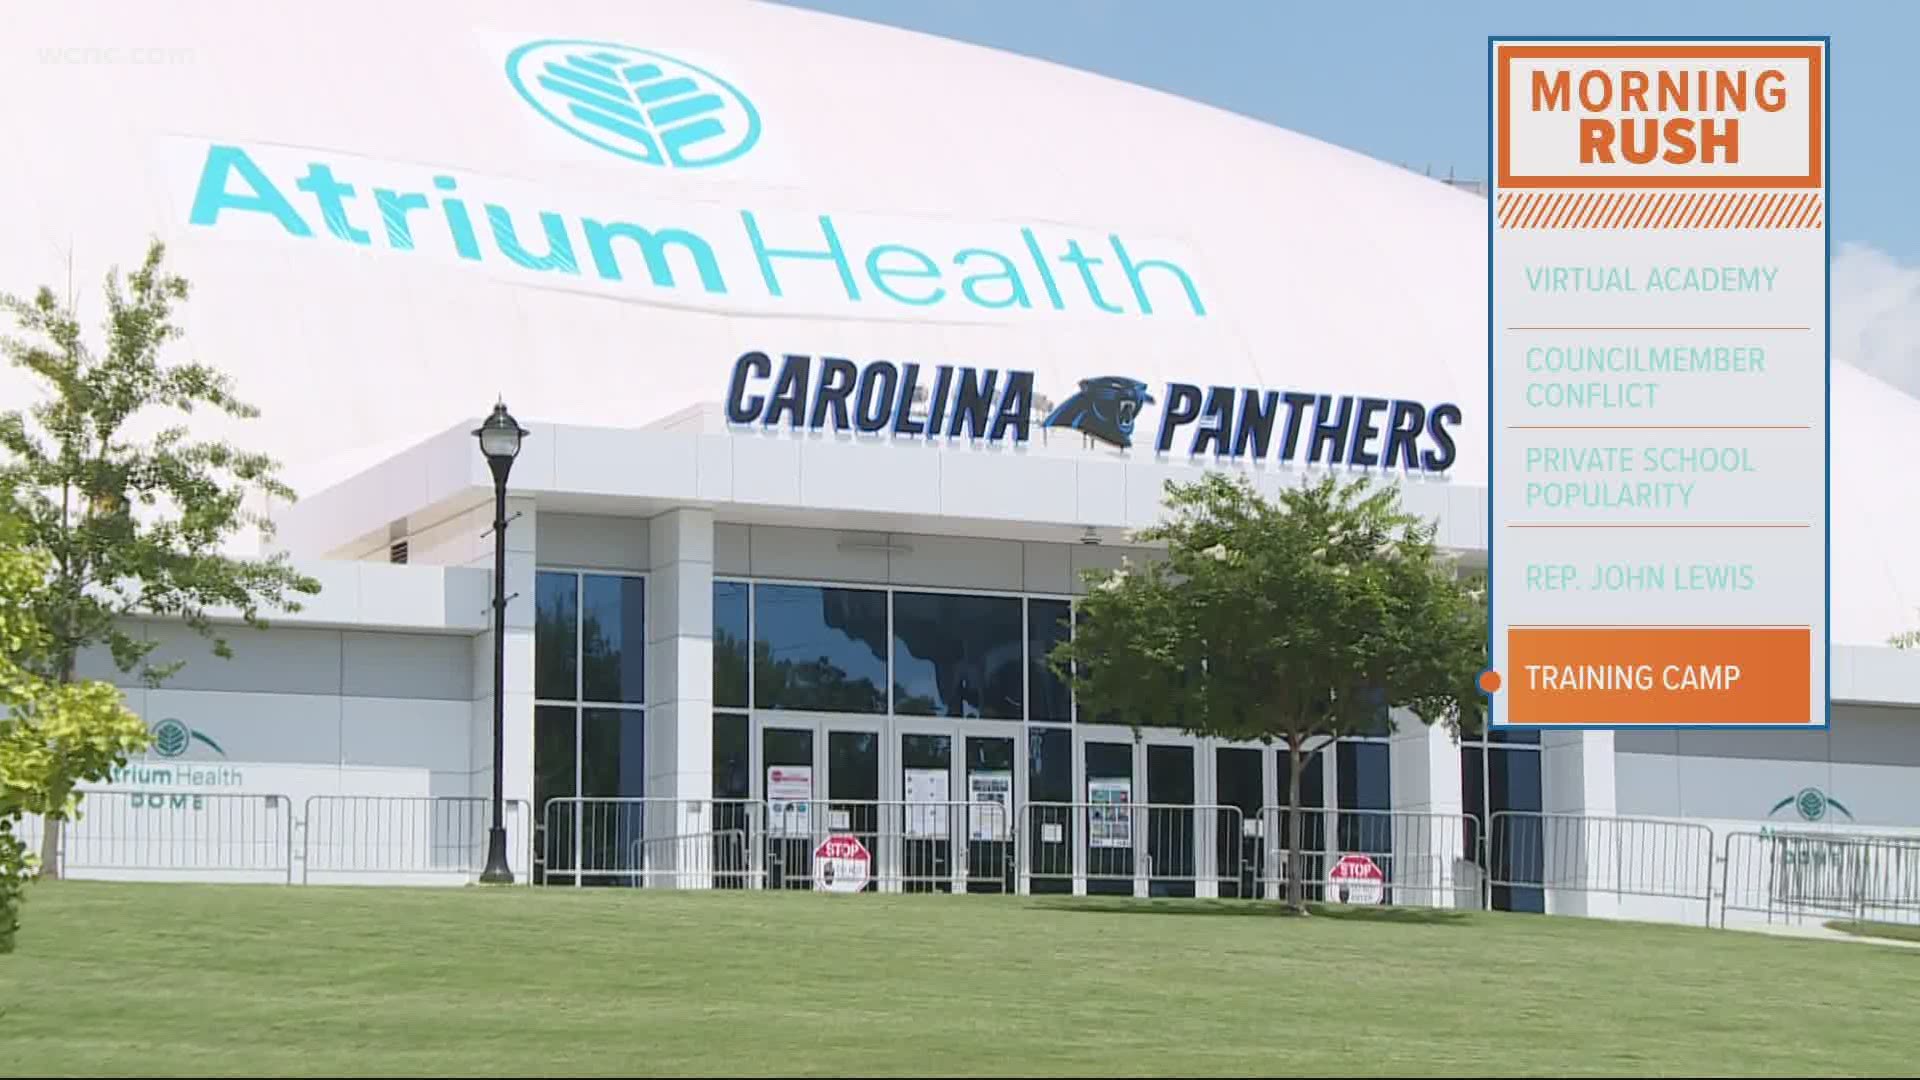 Training camp will be held at Bank of America Stadium for the first time. Players will have to test negative for coronavirus several times before practicing.